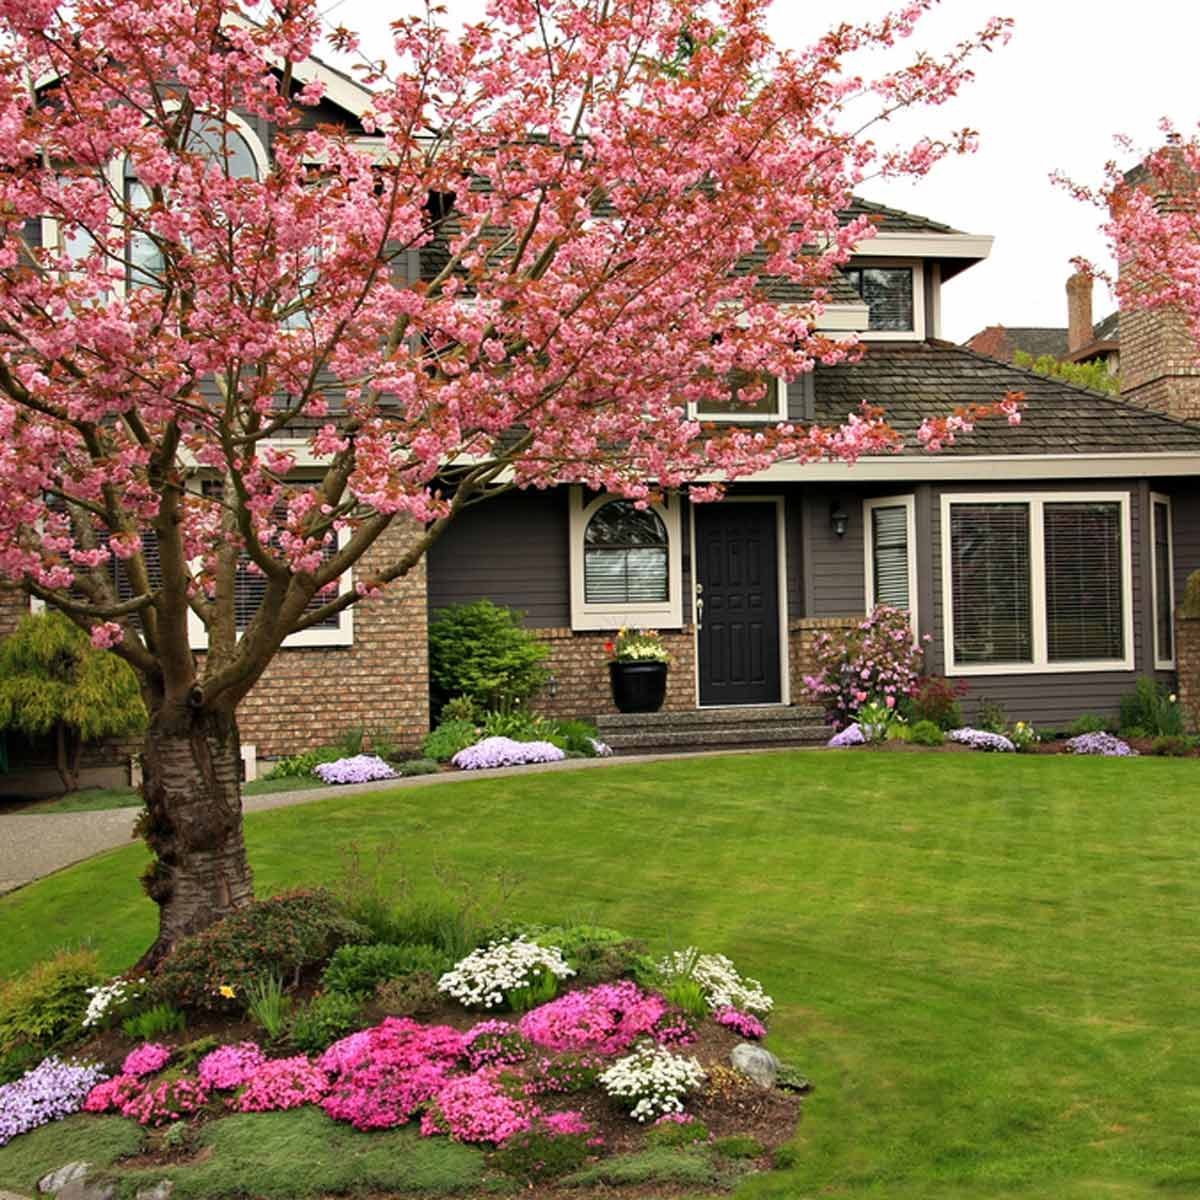 10 Tips for Landscaping Around Trees | Family Handyman